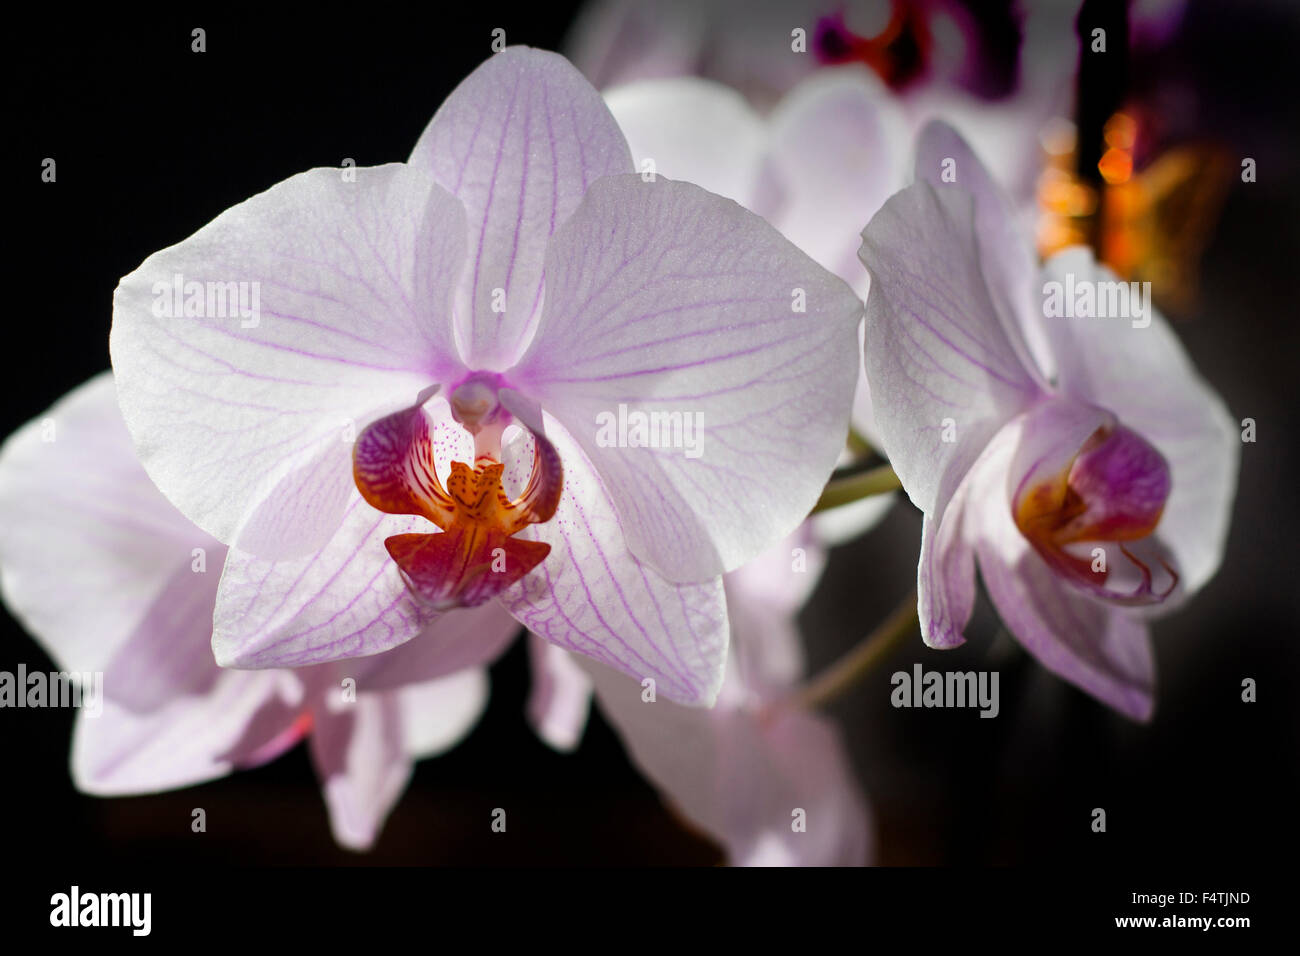 White and violet orchid flower on black background Stock Photo